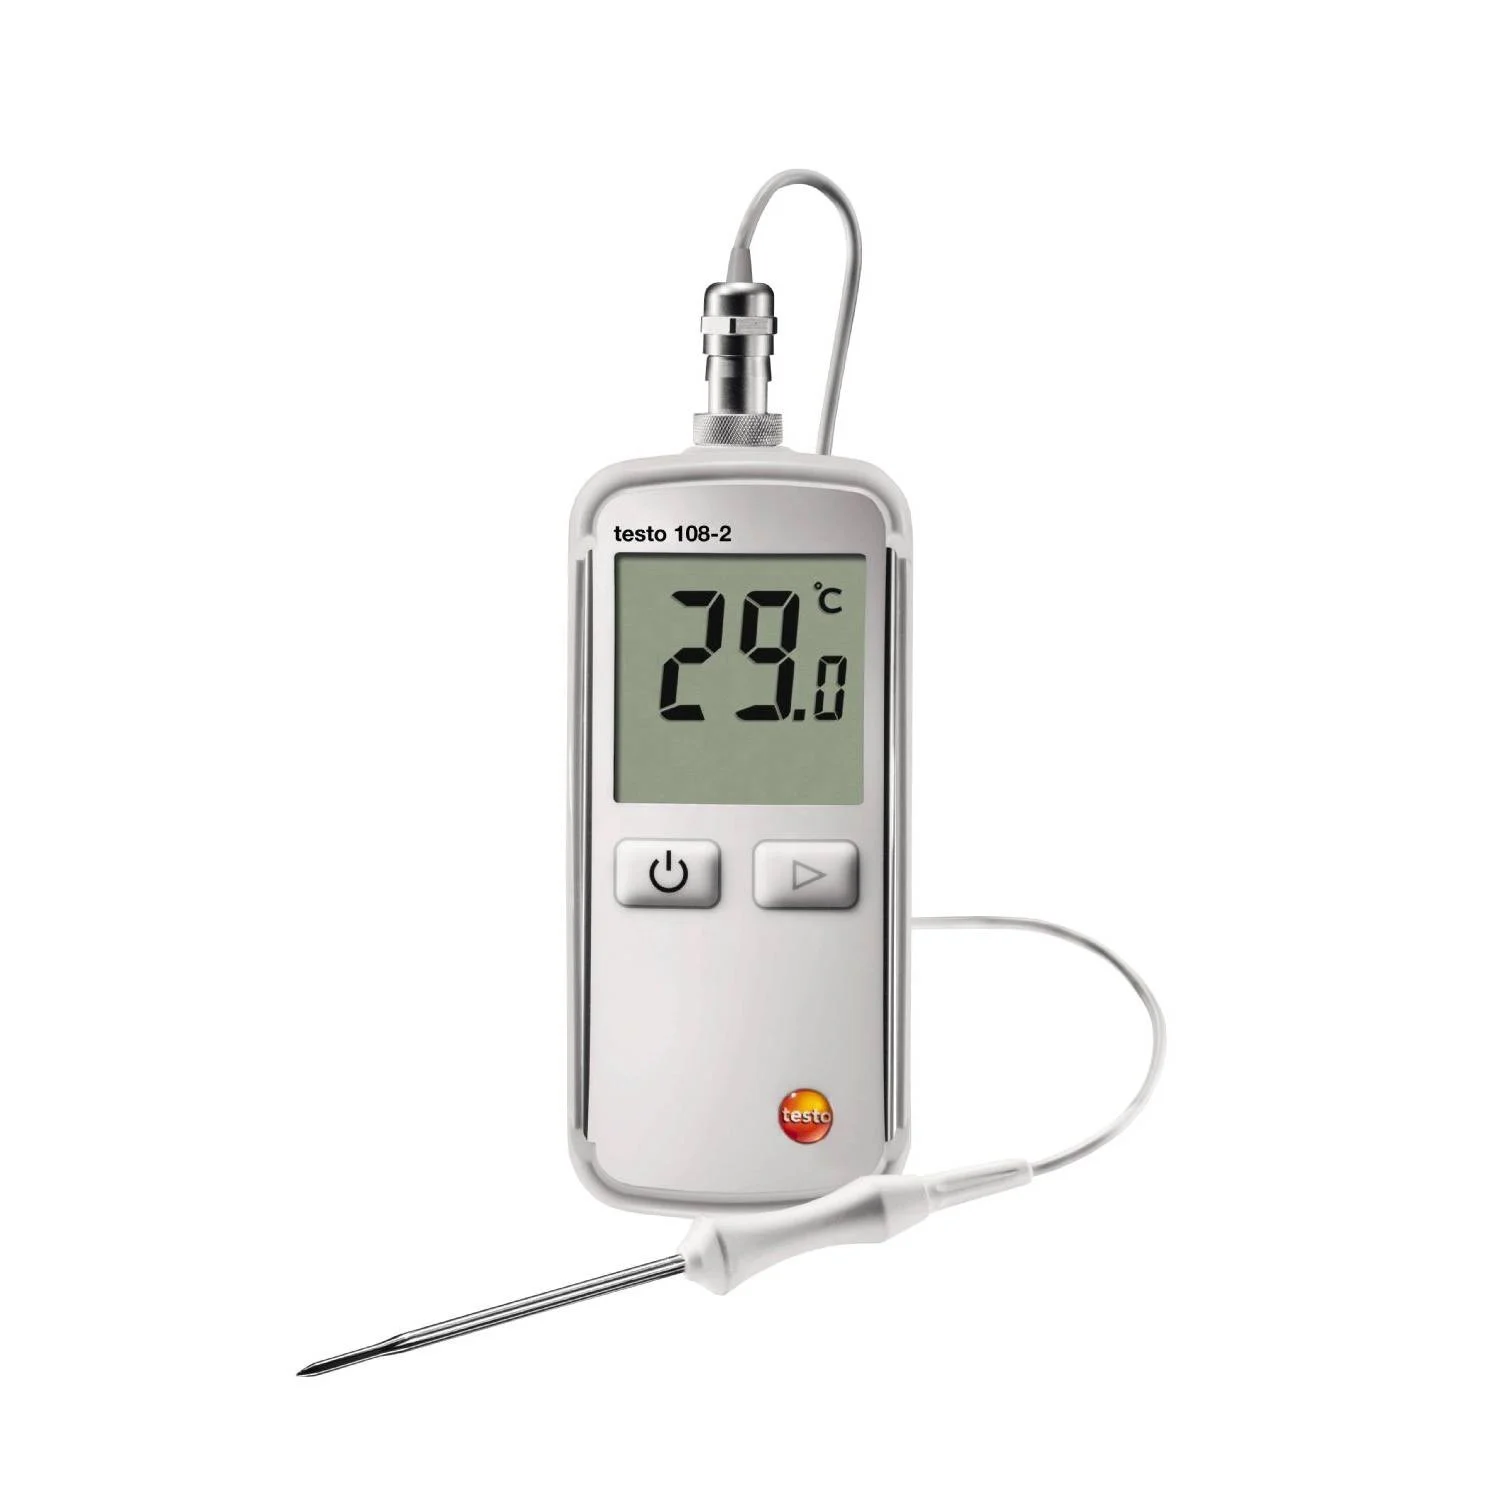 waterproof digital food thermometer testo 108-2 with lockable type K / T thermocouple probe